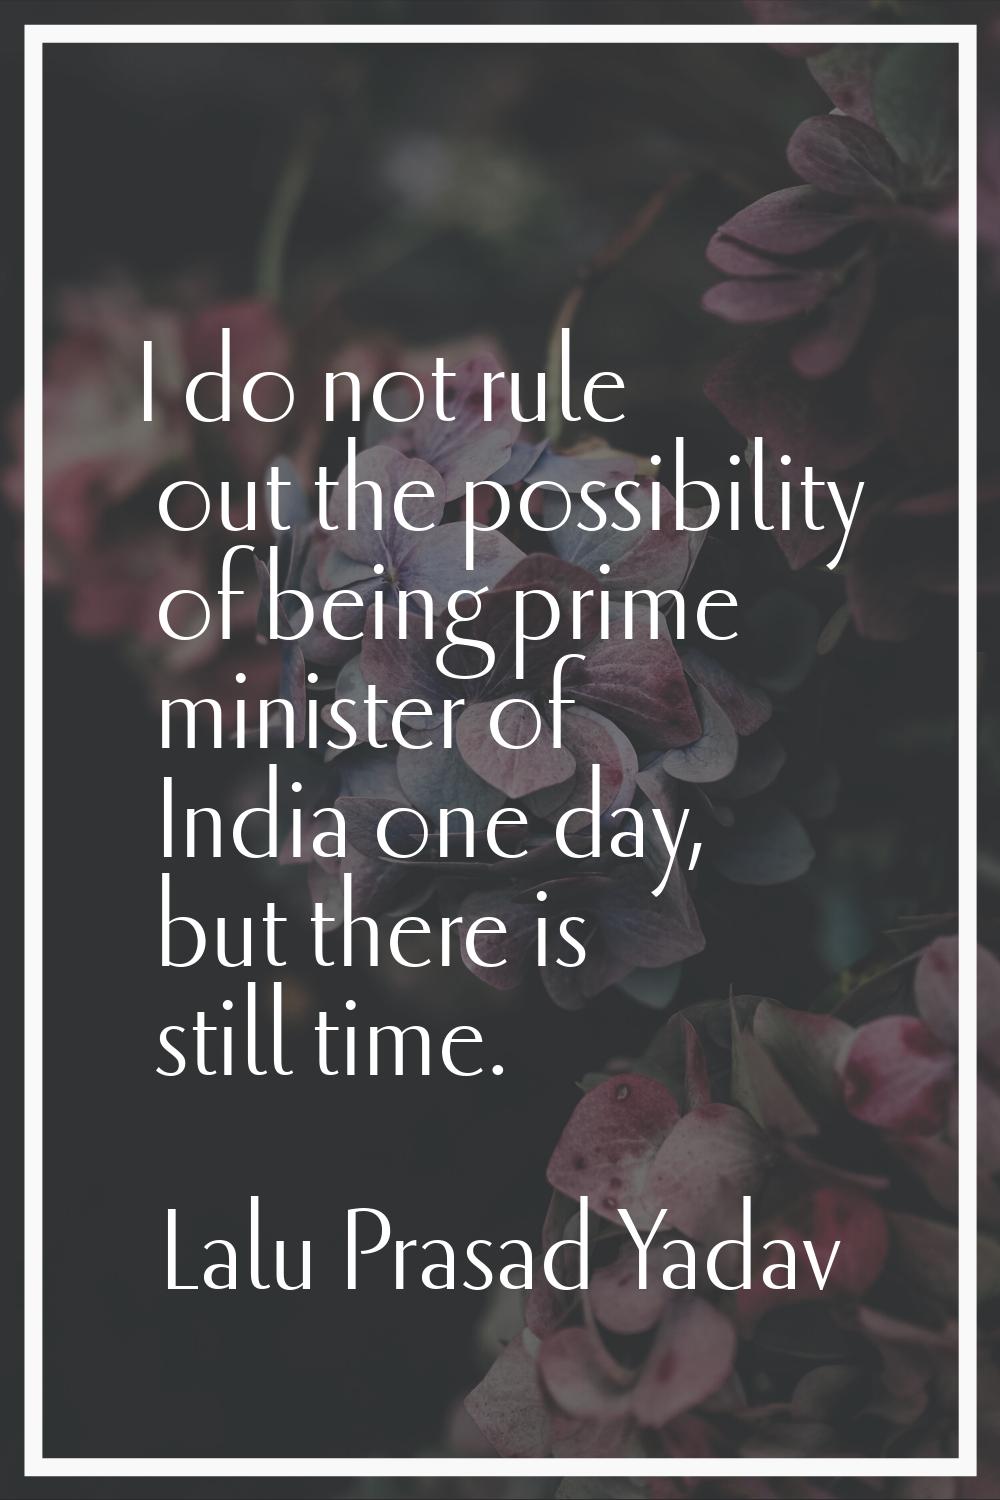 I do not rule out the possibility of being prime minister of India one day, but there is still time